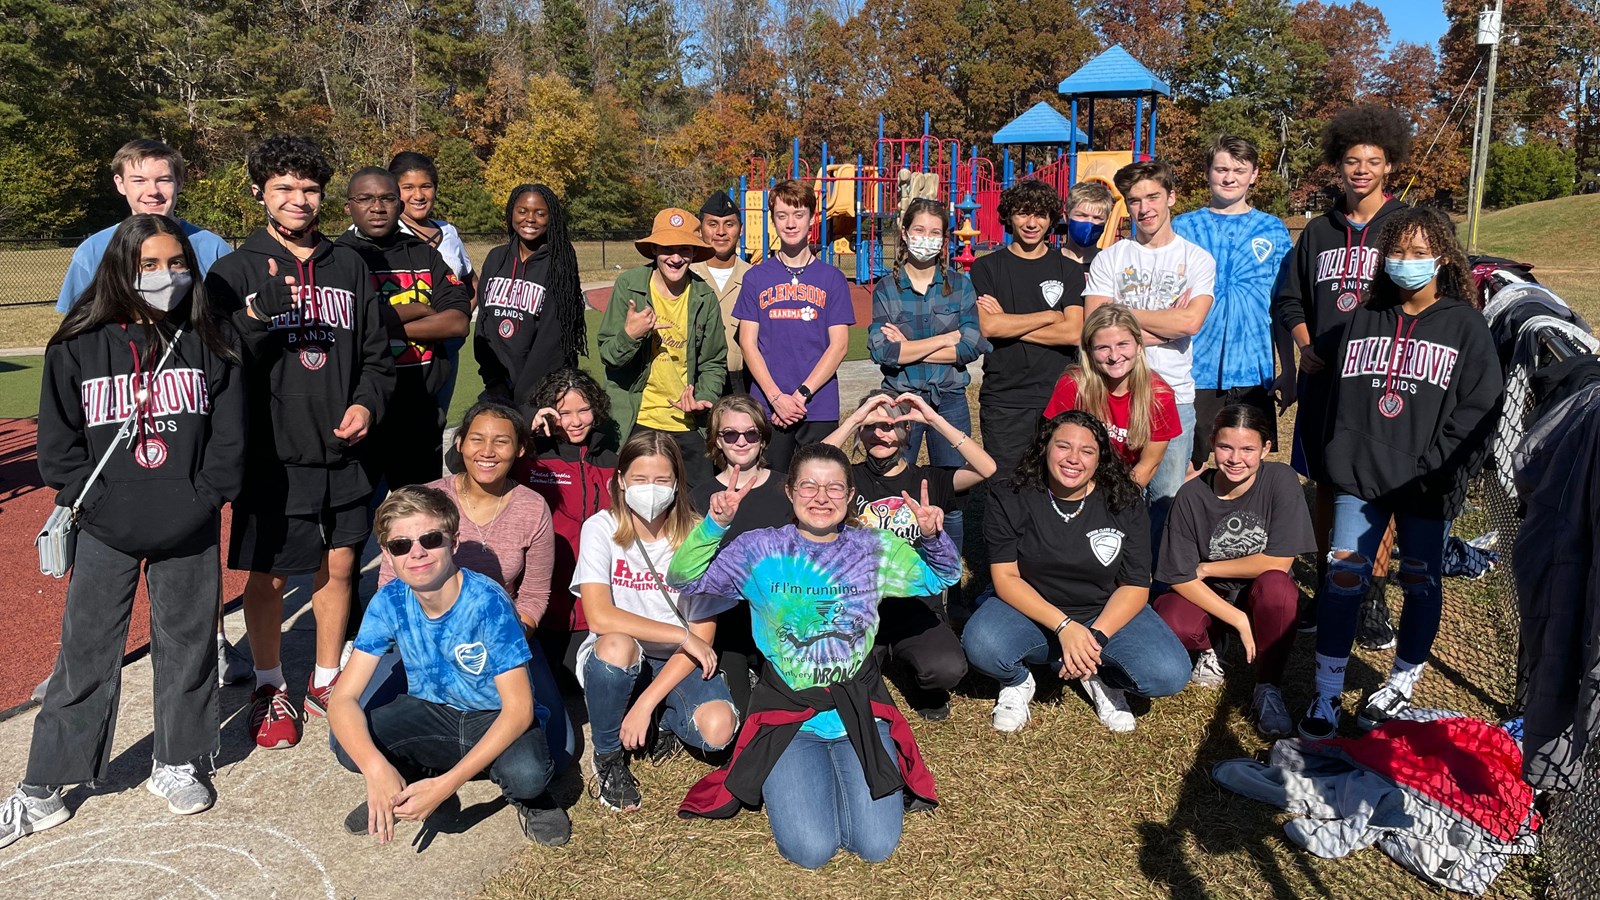 Hillgrove High School students help march out hunger